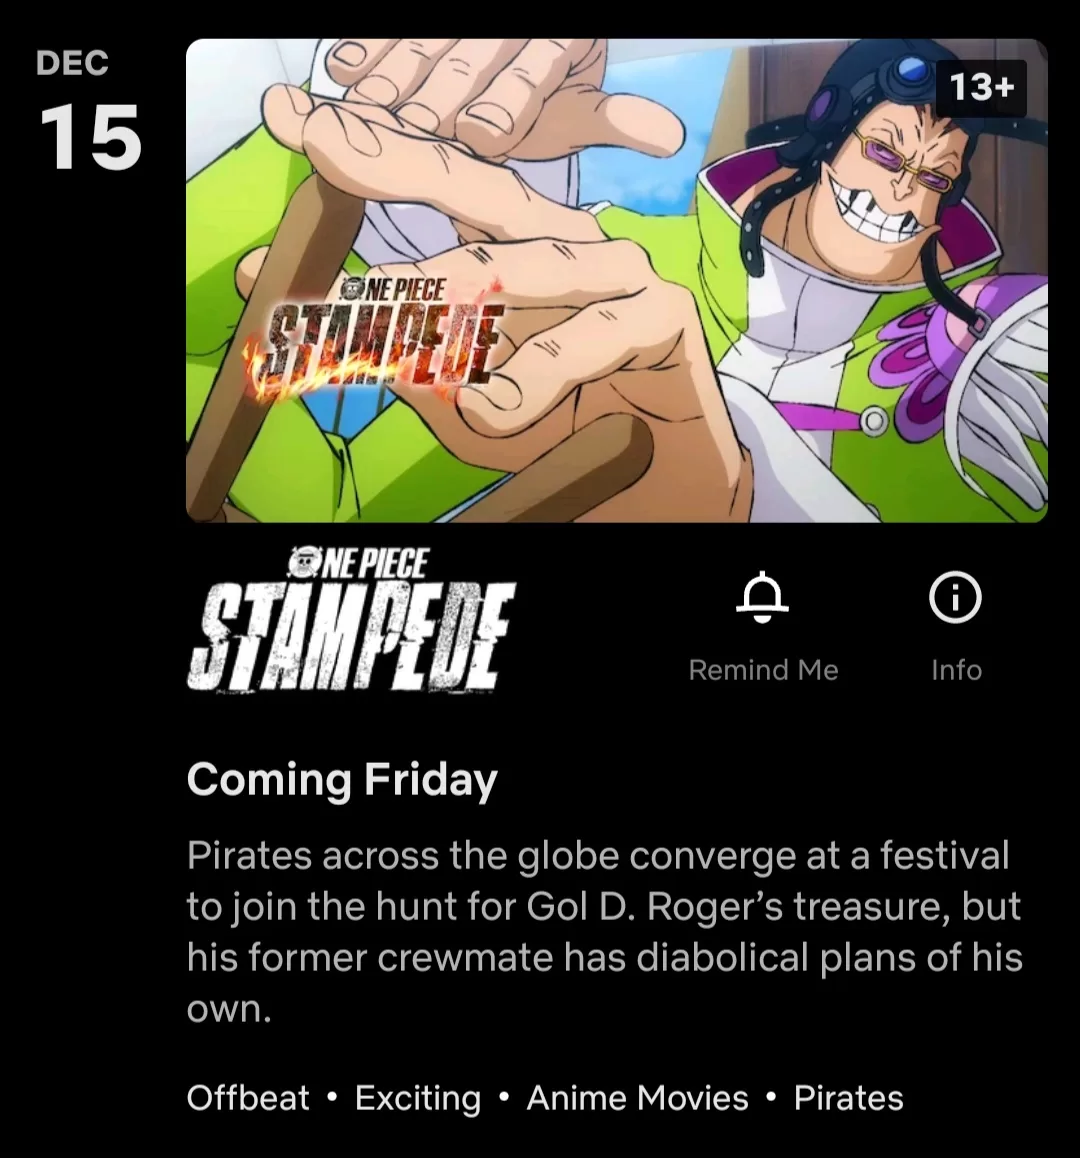 One Piece Film: Red is Now Streaming on Netflix